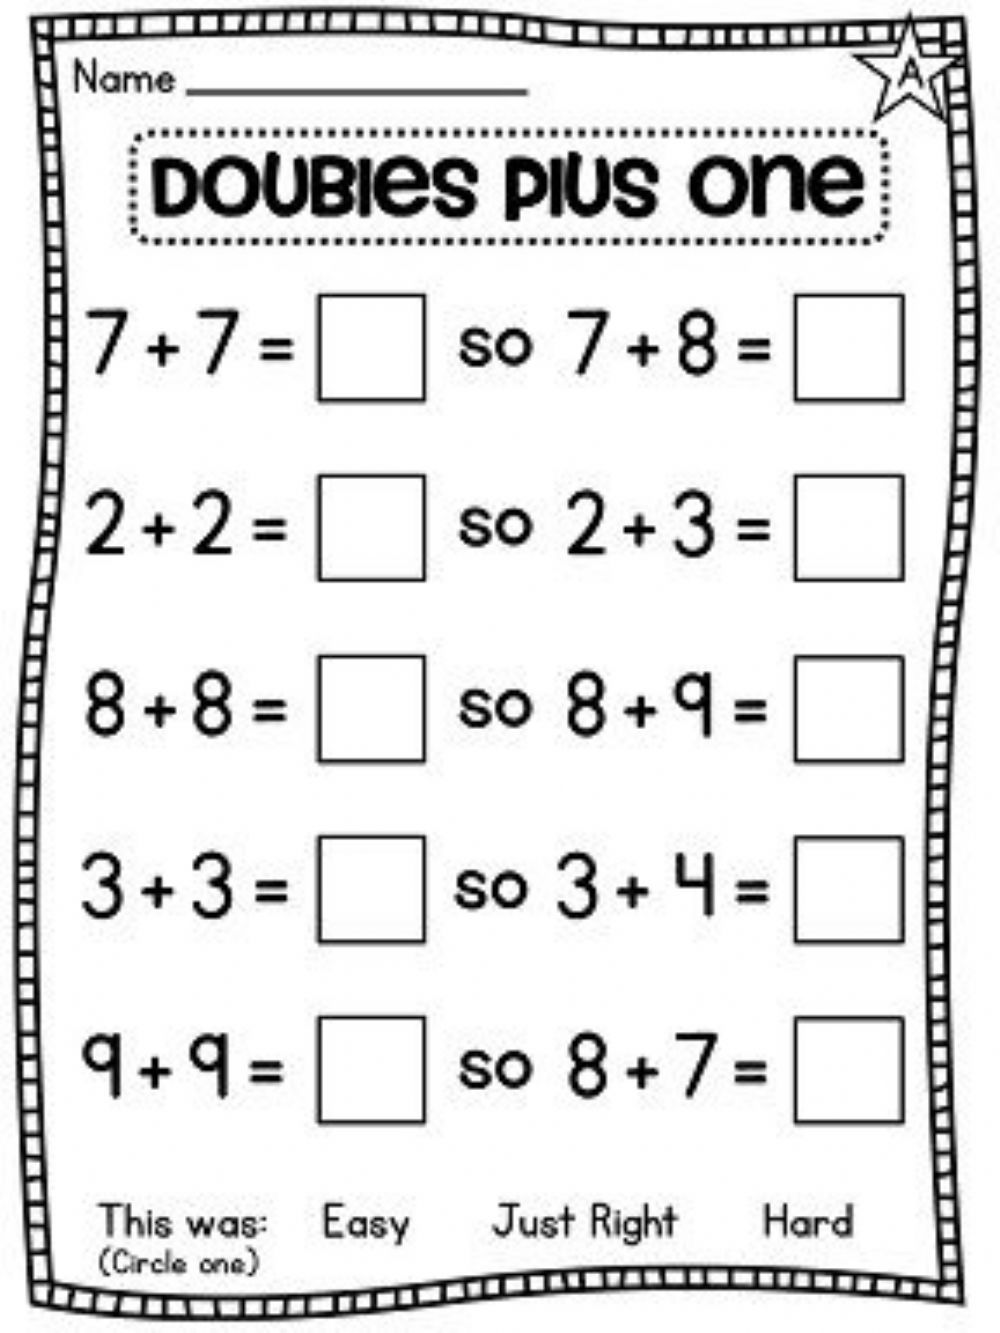 Doubles Plus One Worksheet Worksheets For Home Learning